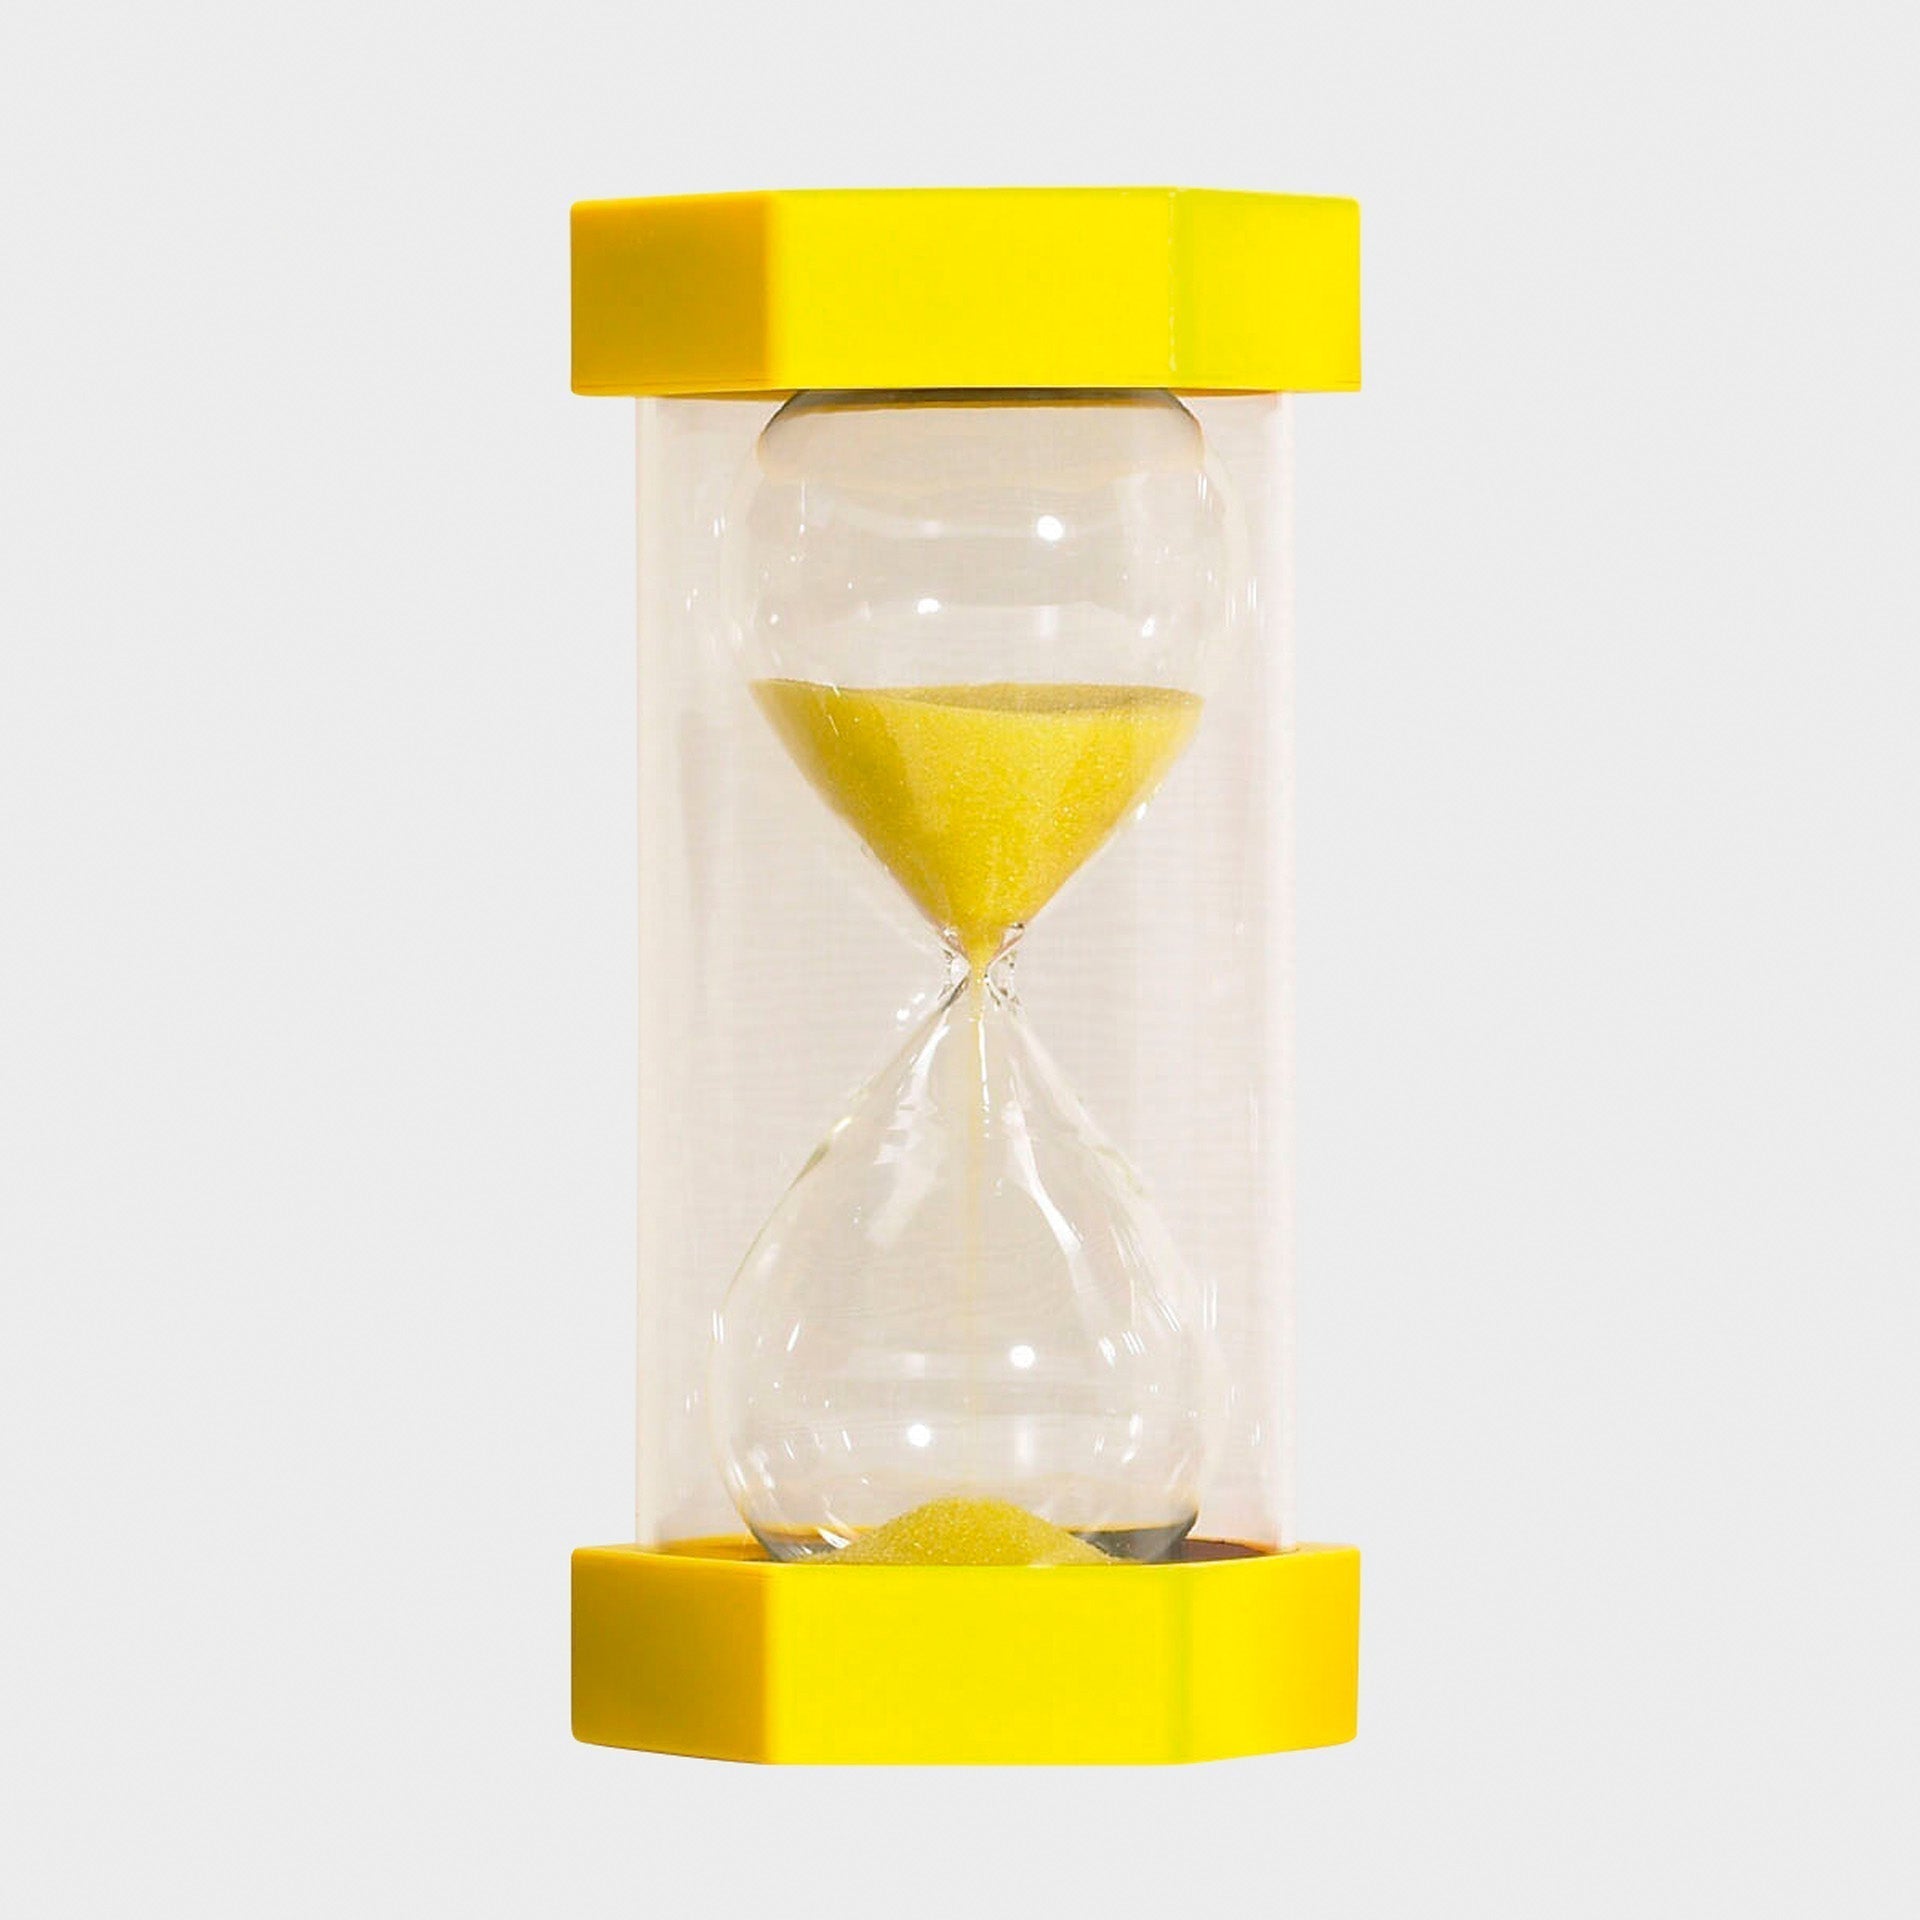 Mega Sand Timer 5 Minutes, These Mega sand timers are probably the largest sand timers in existence at 300mm in height. The mega sand timer counts 5 minutes and is visually stunning and perfect for use in a classroom setting. The Mega sand timers have large moulded end caps and thick protective walls which allow for safe and easy handling. TickiT® Mega Sand Timers - these robust and colourful sand timers are larger than our standard ColourBright range, making it easier for younger children to manipulate and